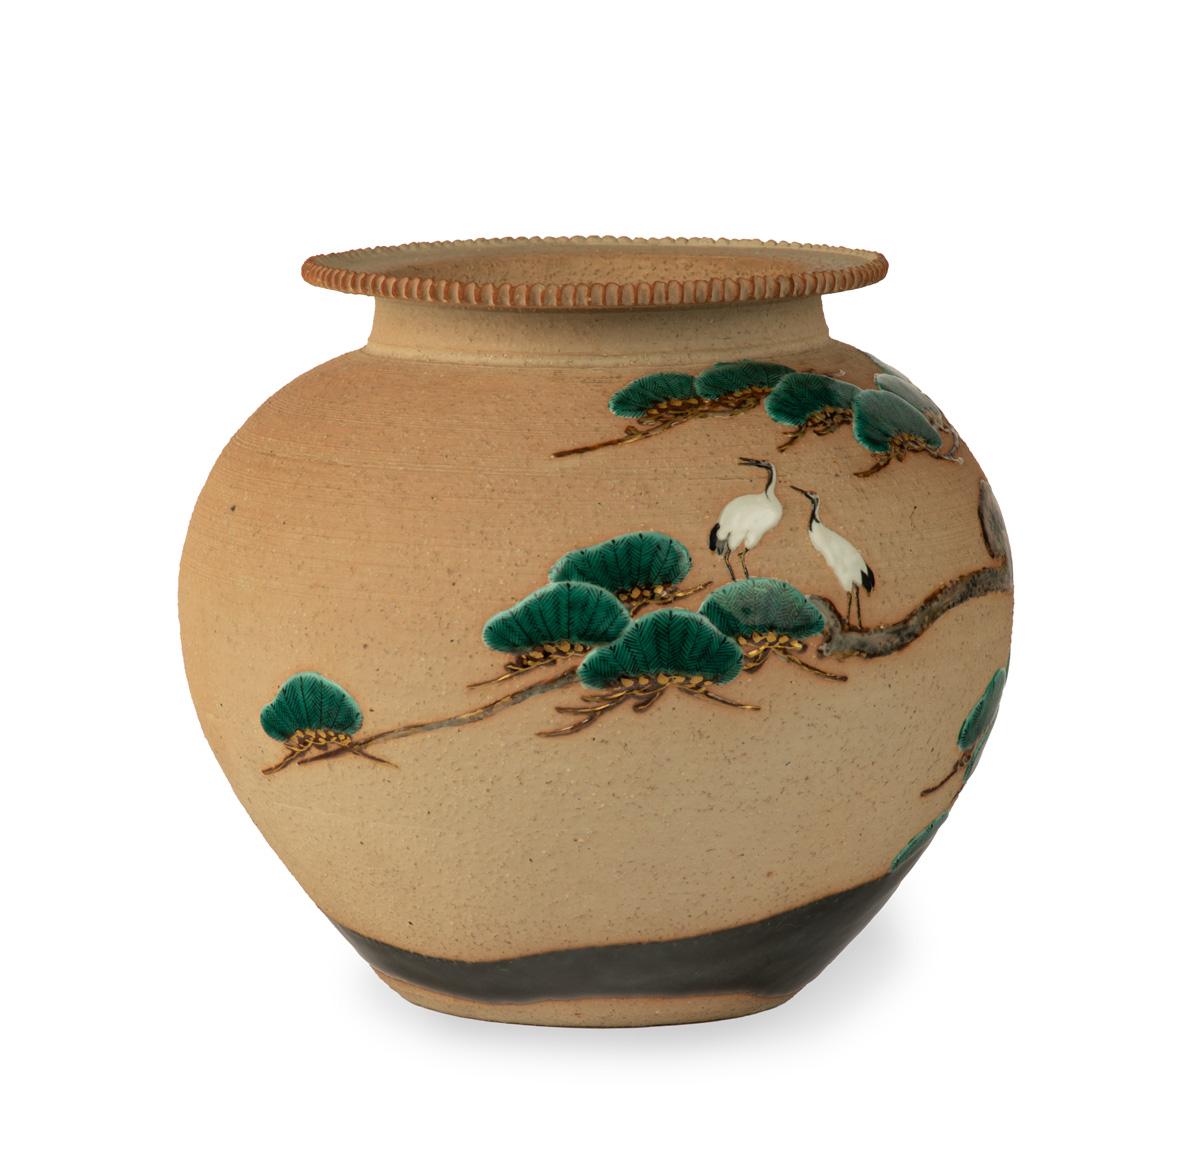 As part of our Japanese works of art collection we are delighted to offer this most captivating Late Meiji (1868-1912) early Taisho period (1912-1926 ),globular stoneware vessel stemming from the highly regarded Imperial studios of Miyagawa Makuzu